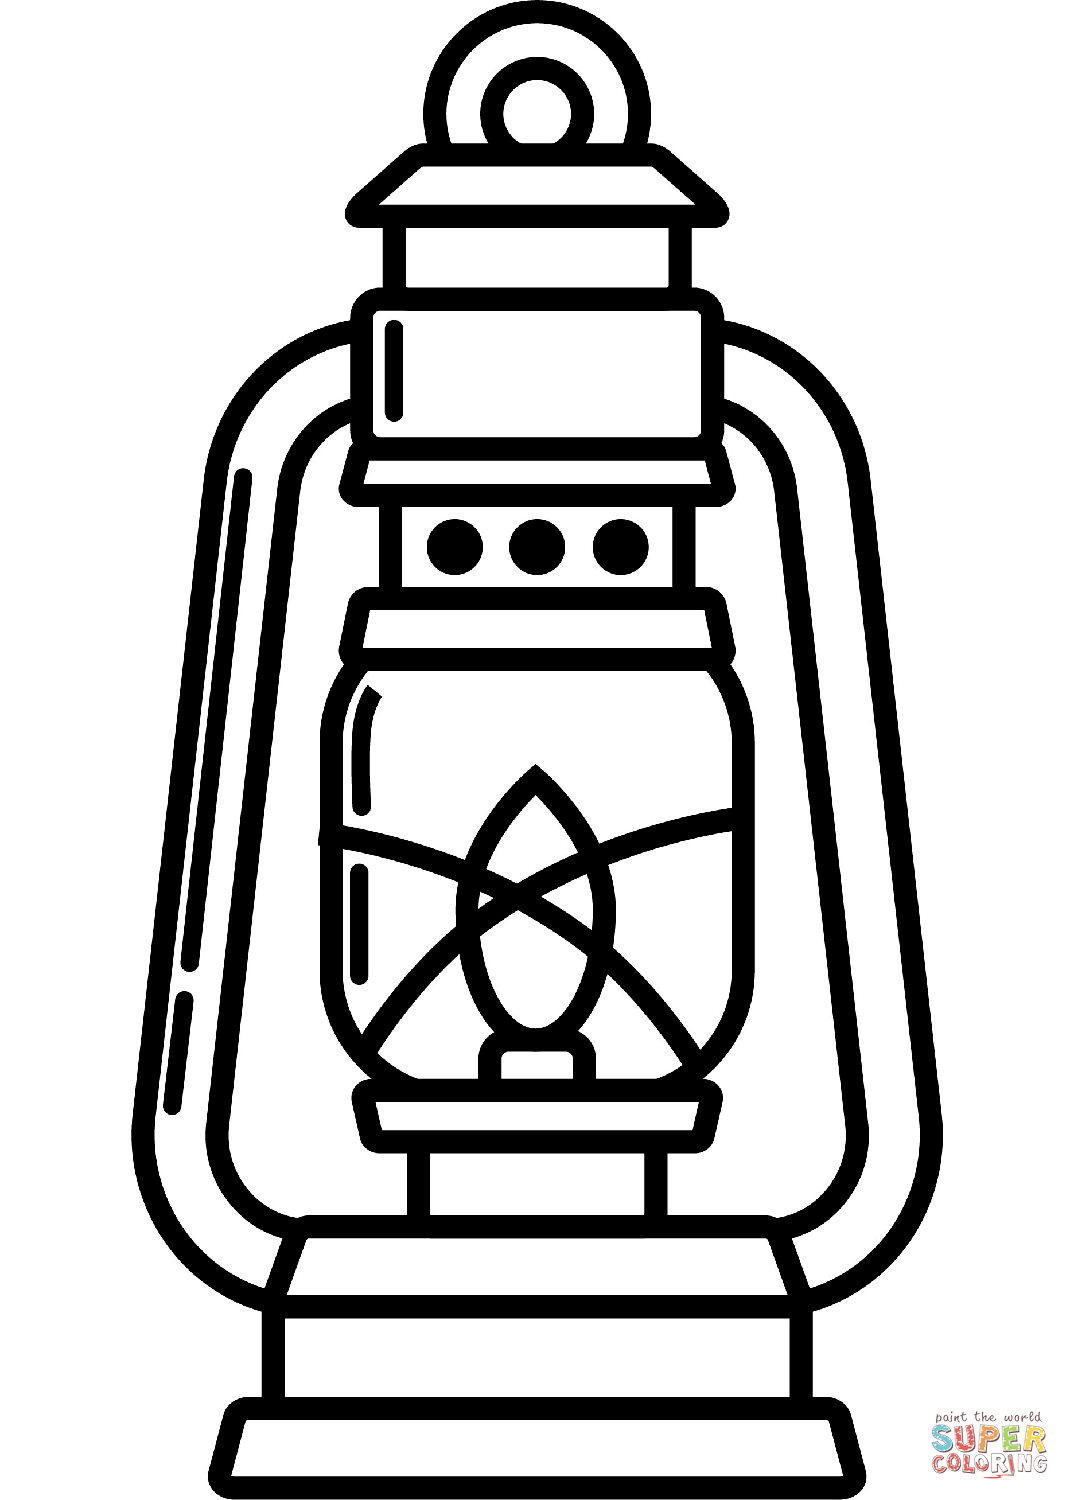 Camping lantern coloring page free printable coloring pages